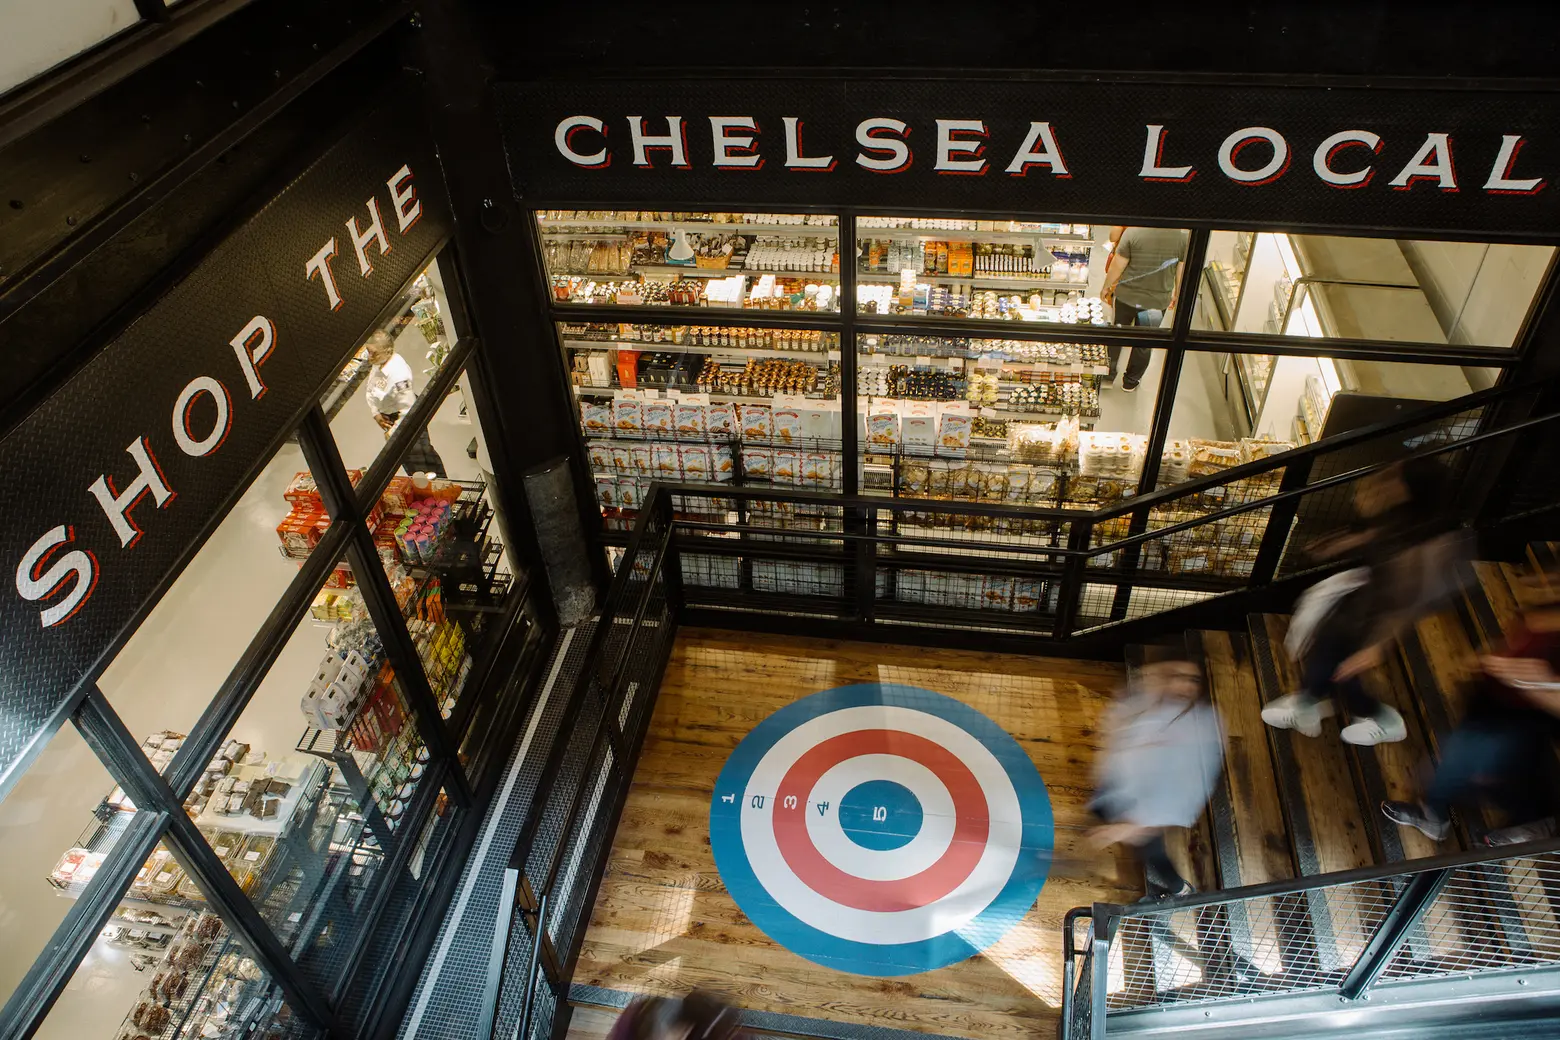 Chelsea Market’s underground, grocery-focused Chelsea Local will expand with new vendors